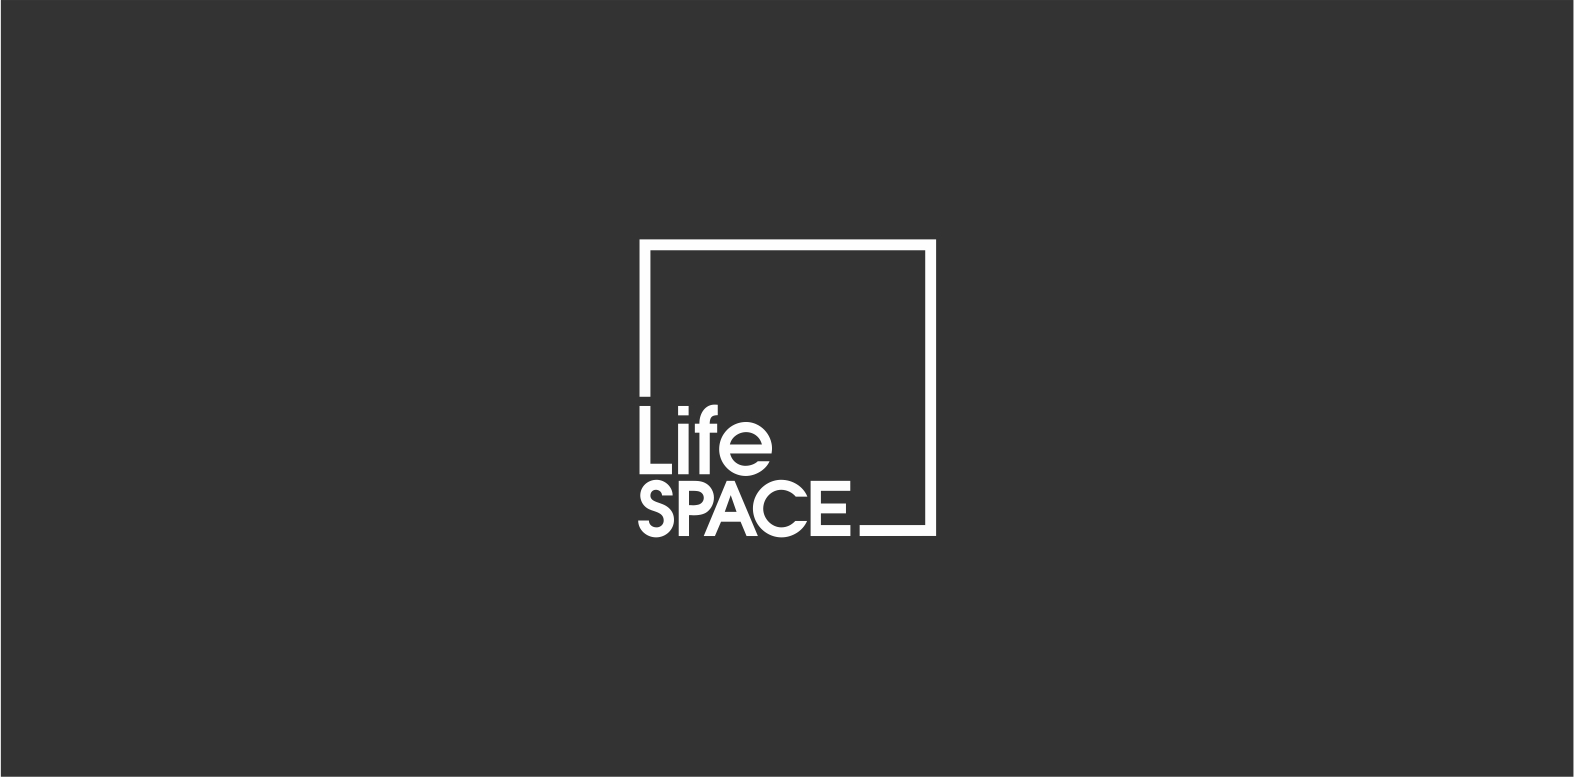 Life Space